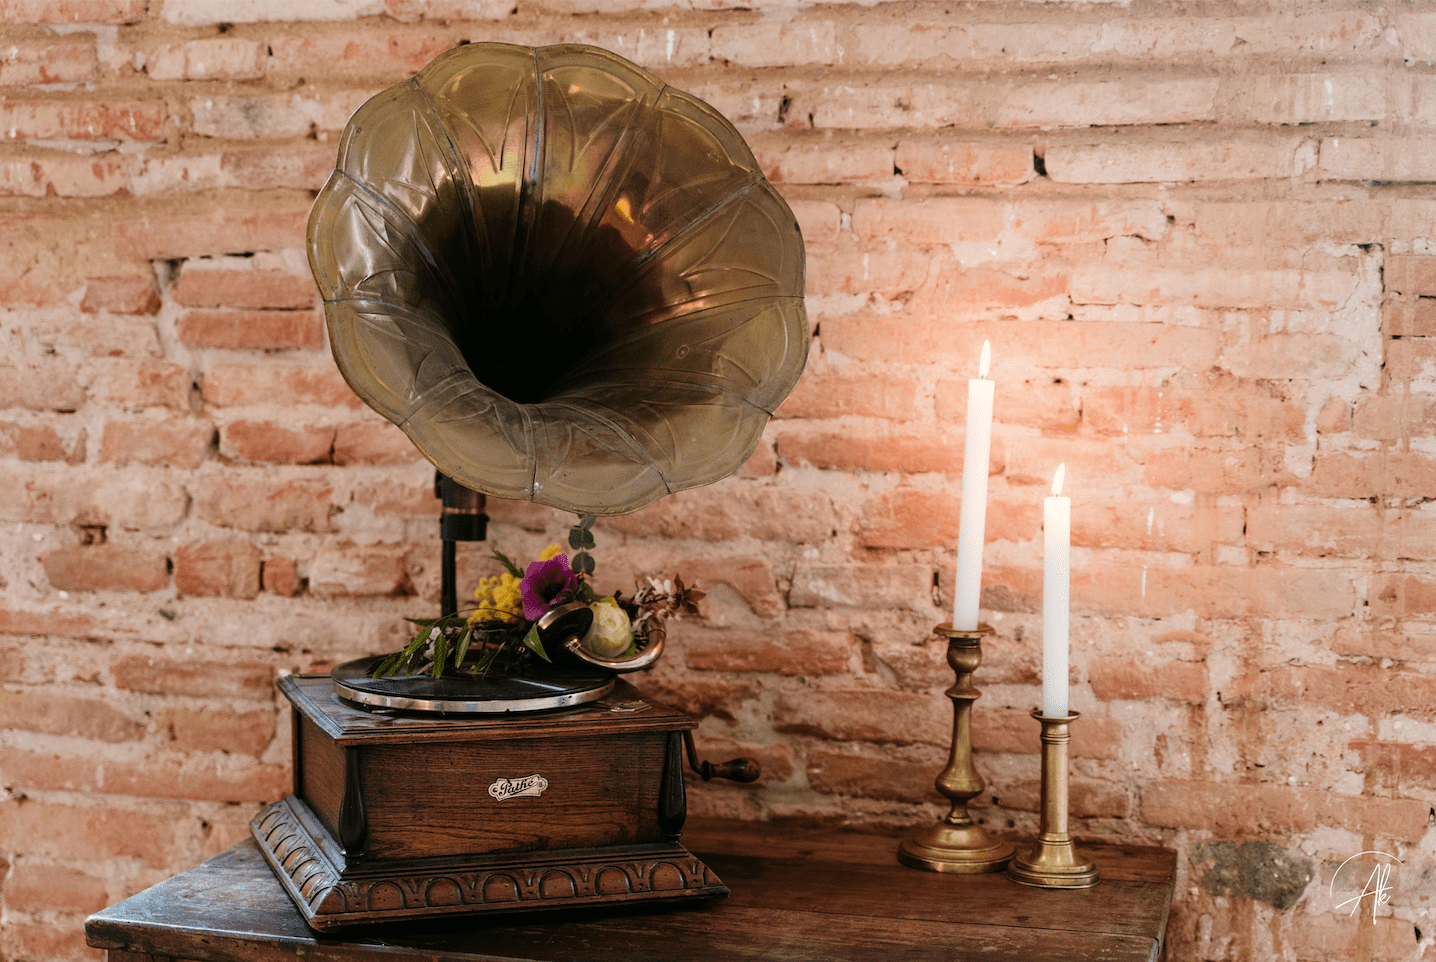 Gramophone By Jimmy 1 